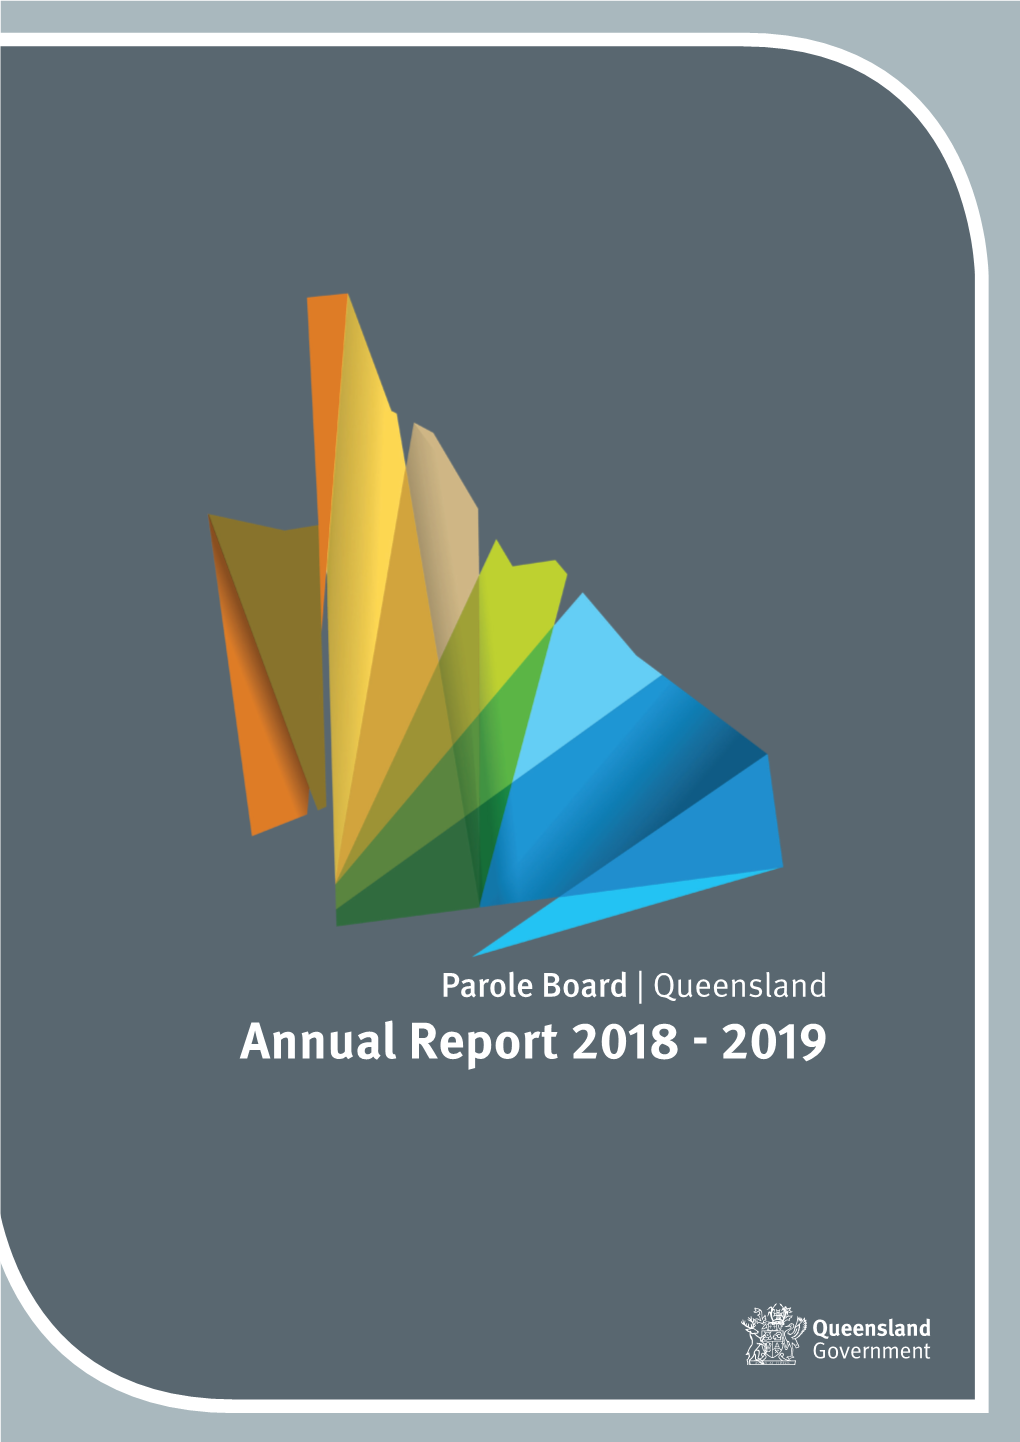 Parole Board Queensland Annual Report 2018-2019 Detailing Its Operations and Activities